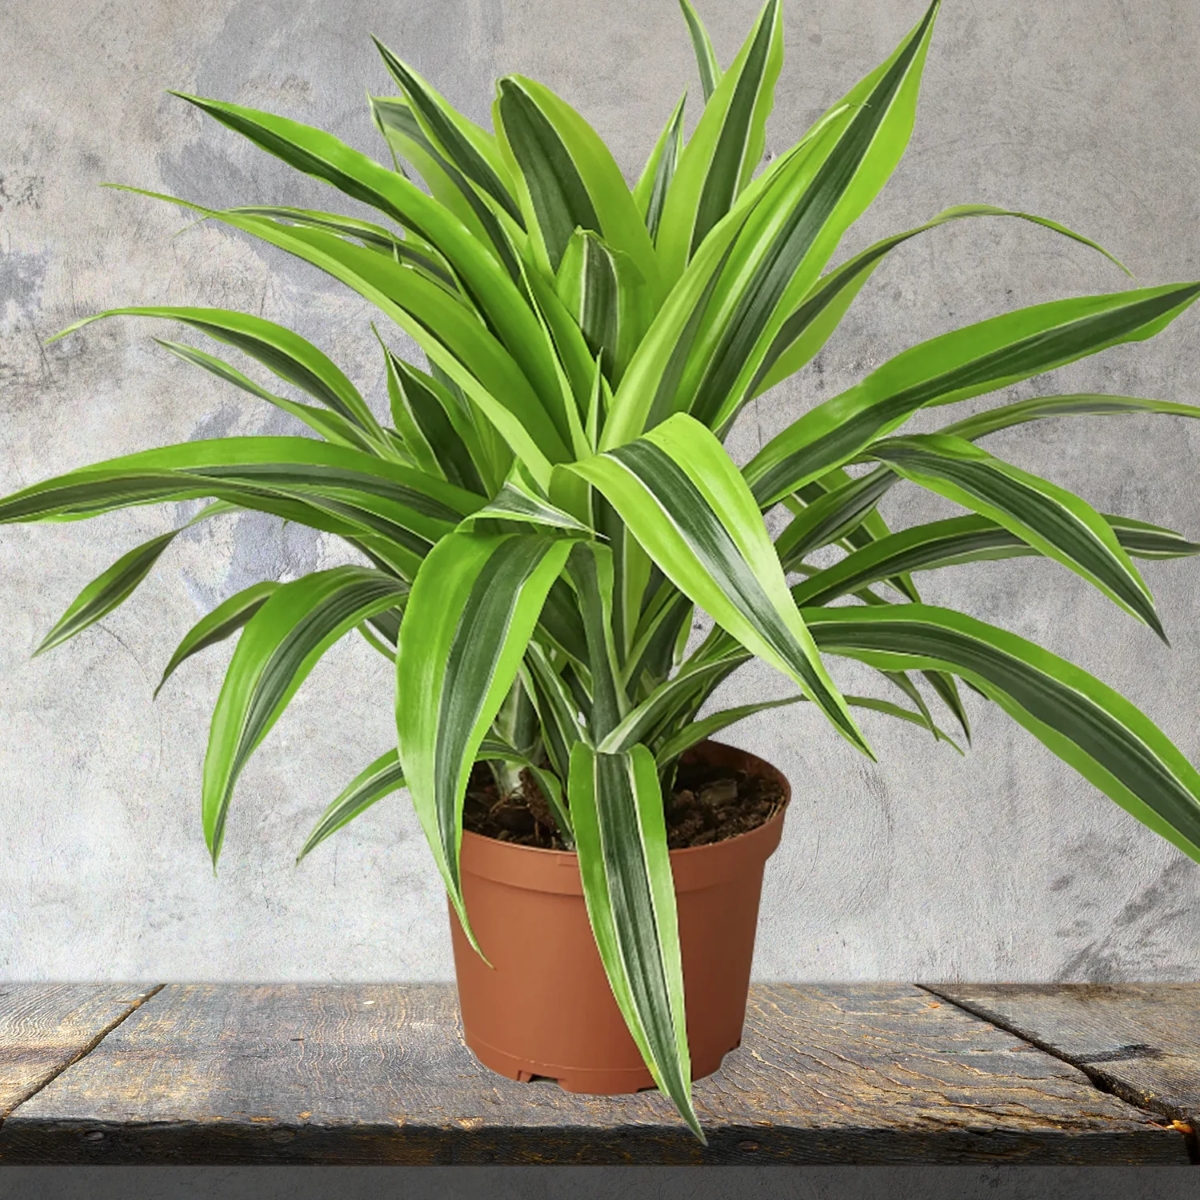 Dracaena potted plant with yellow and green leaves